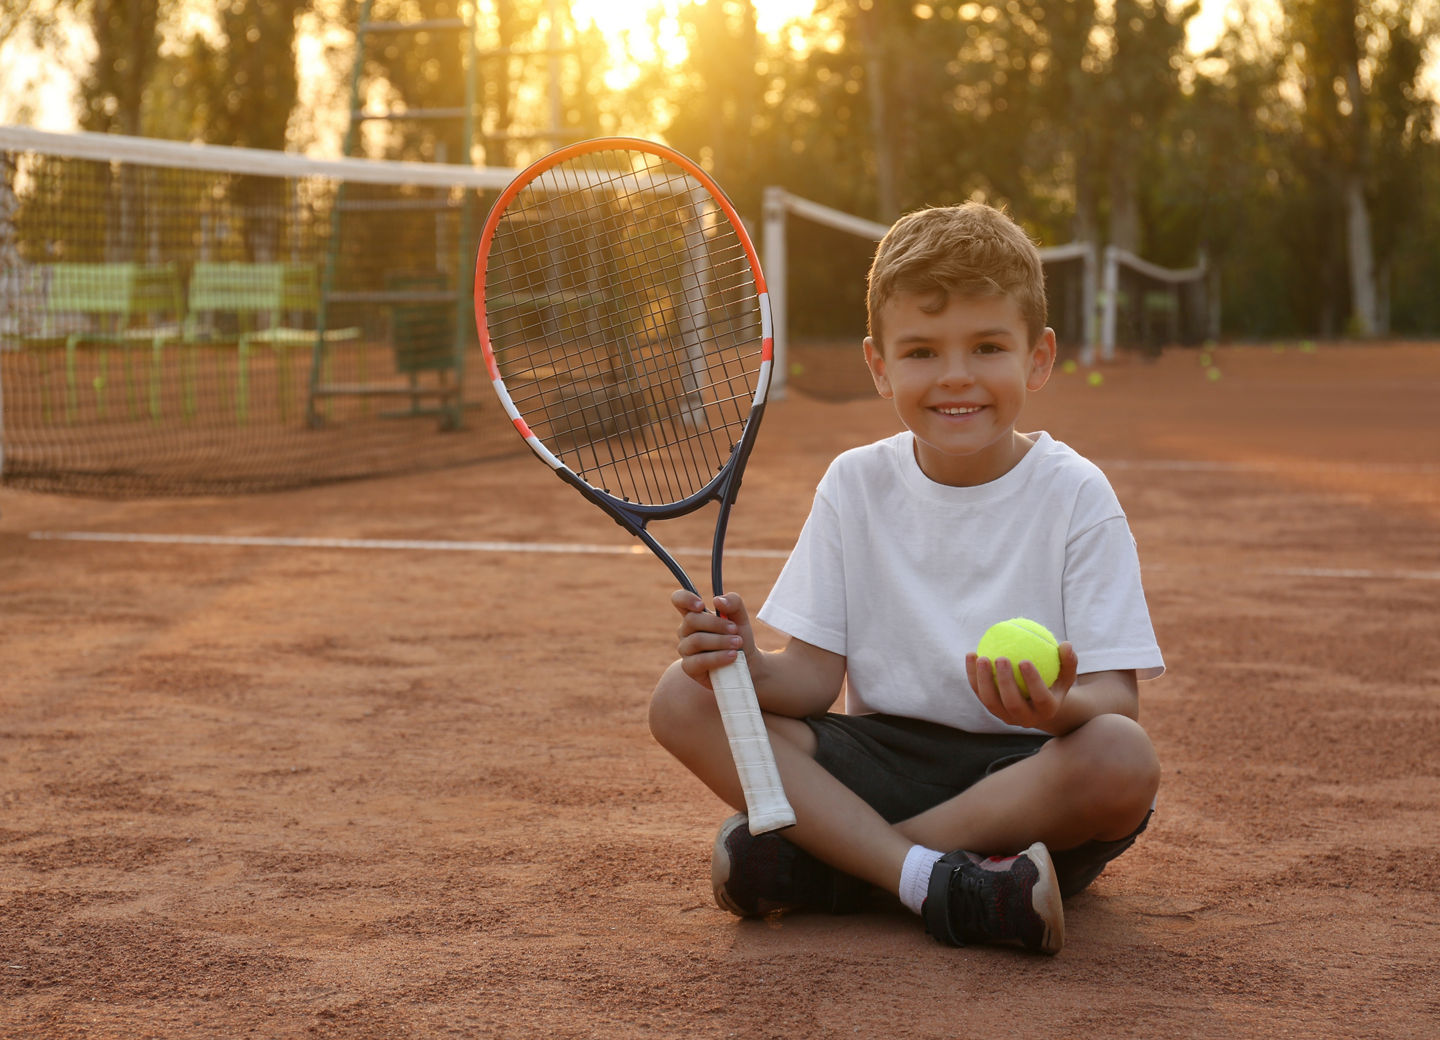 Cute little boy with tennis racket and ball on court outdoors